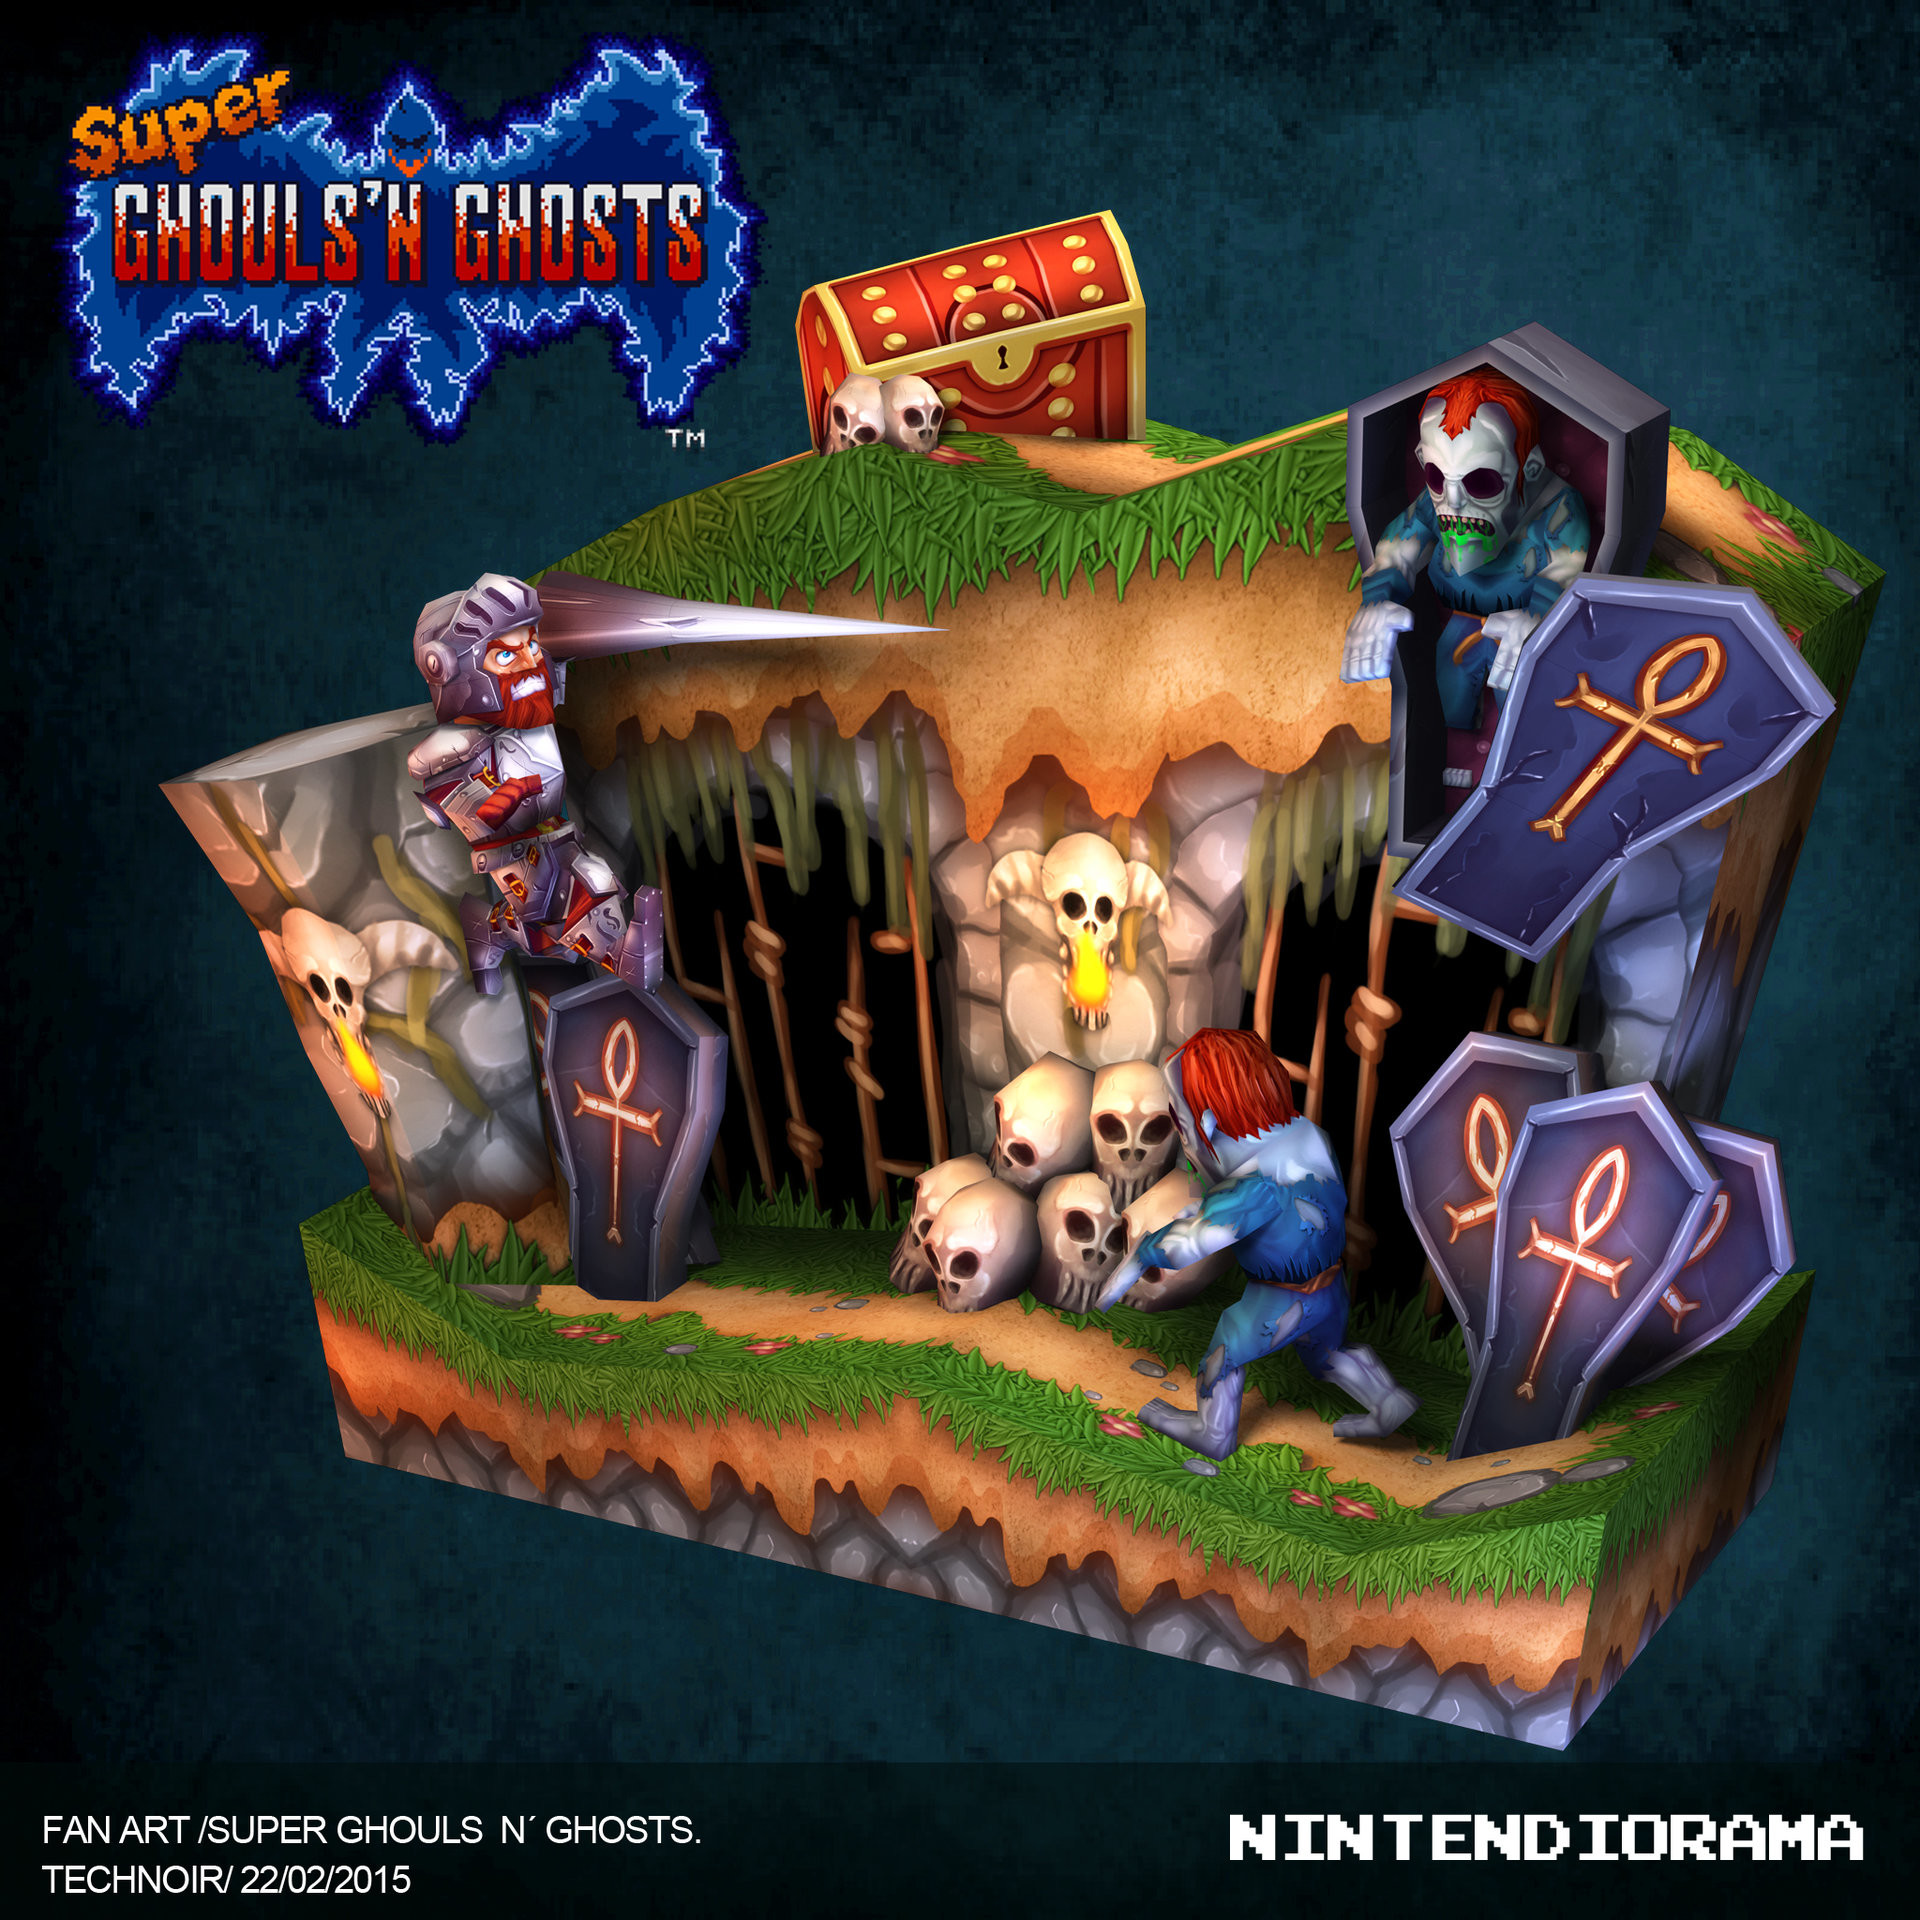 ghouls and ghosts map